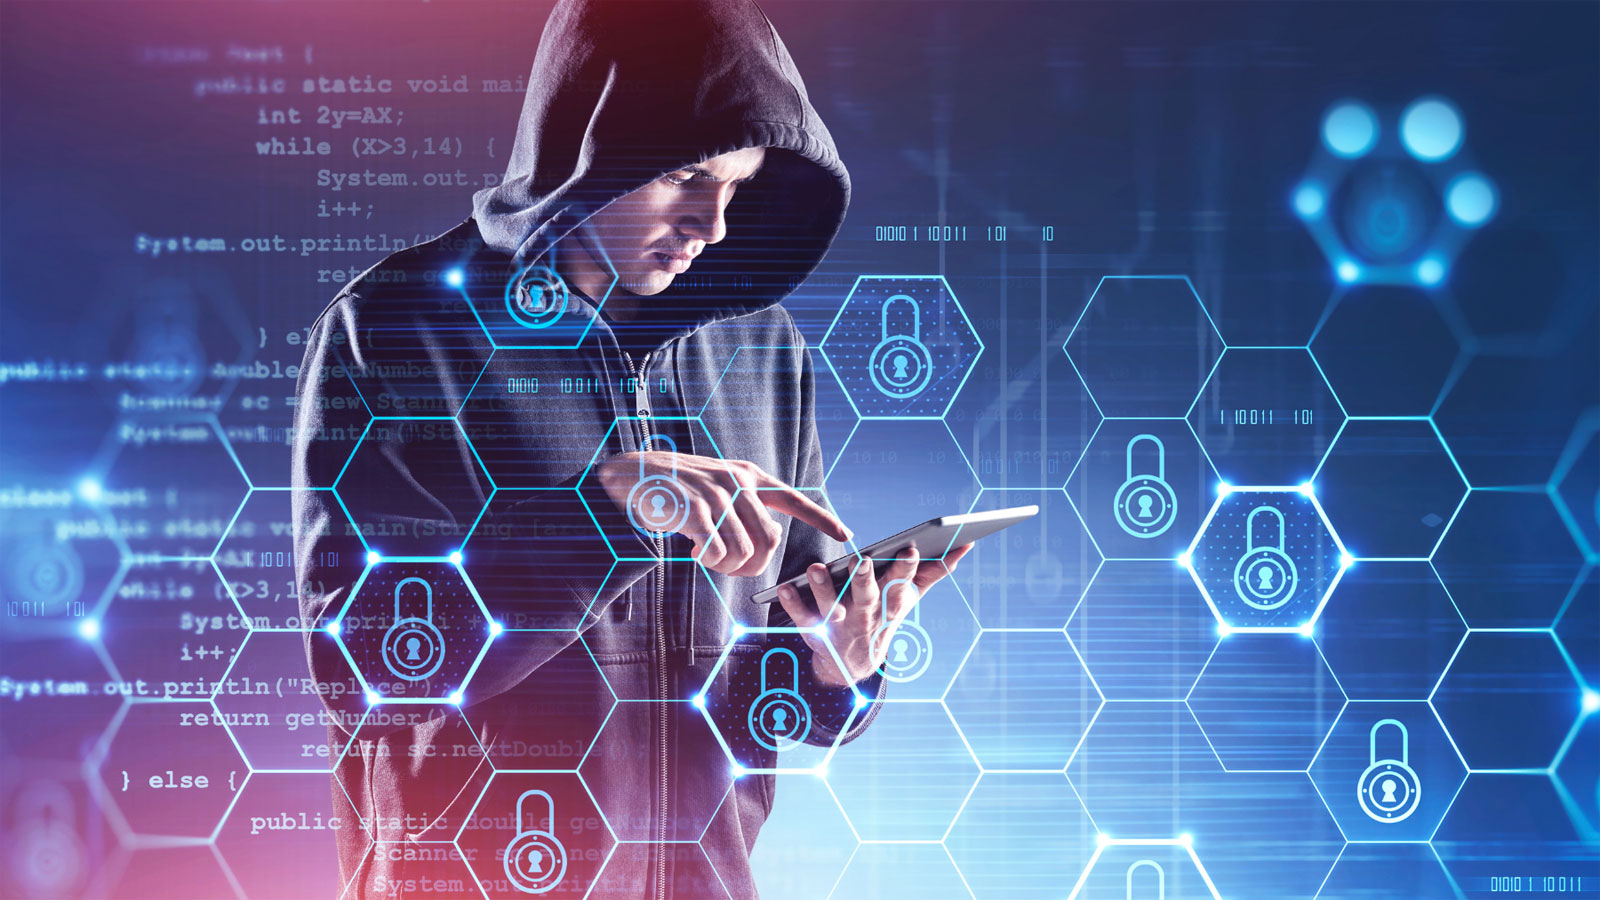 trope photo of a 'hacker' in a dark hoodie with odd lighting/shadows holding a large touchscreen phone or tablet with one hand and about to tap with another, with a glowing blue hexagonal grid outline foreground with bits of code on the left, and lock icons in some of the hexagons